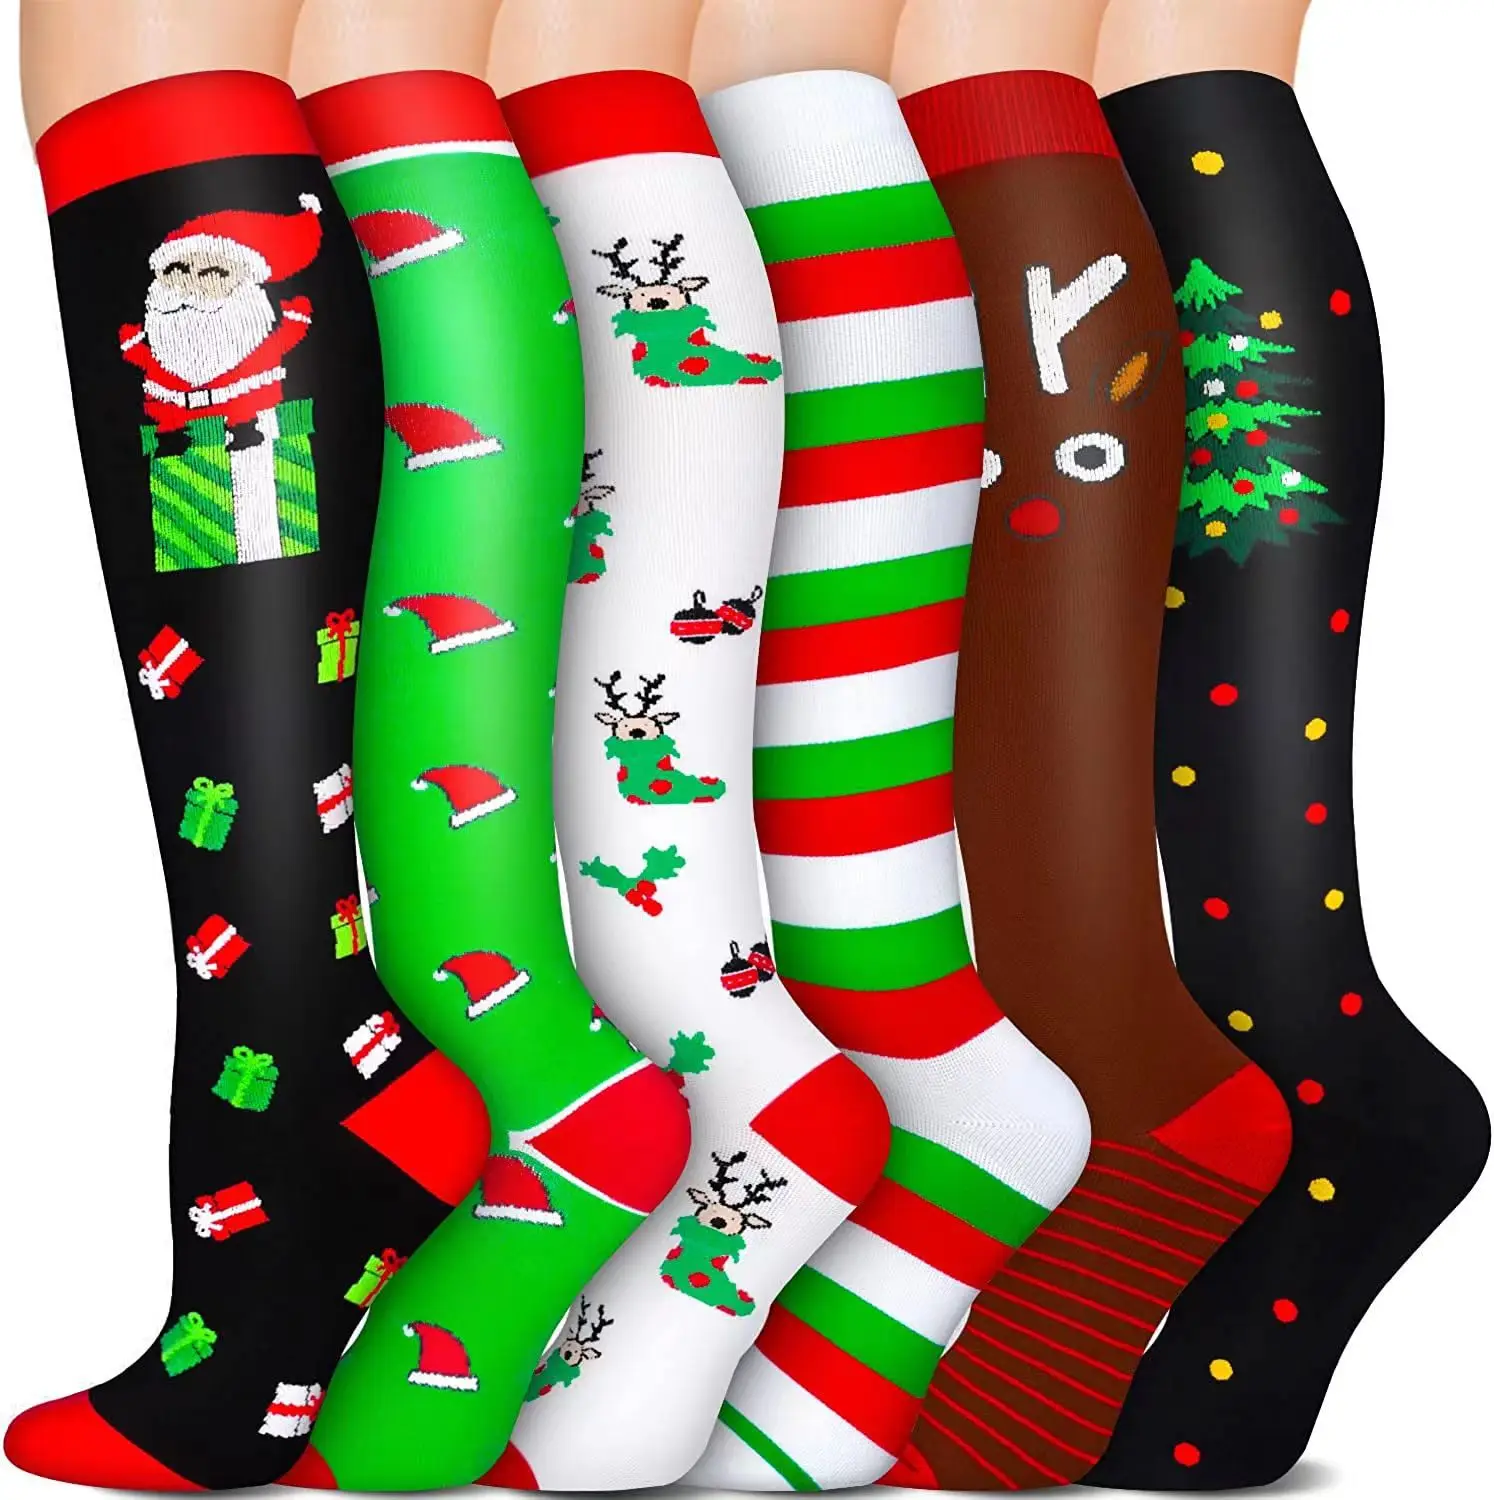 Happy Colorful Style Medical Compression Socks Stockings for Men Women Holiday Gift Sports Christmas Compression Socks